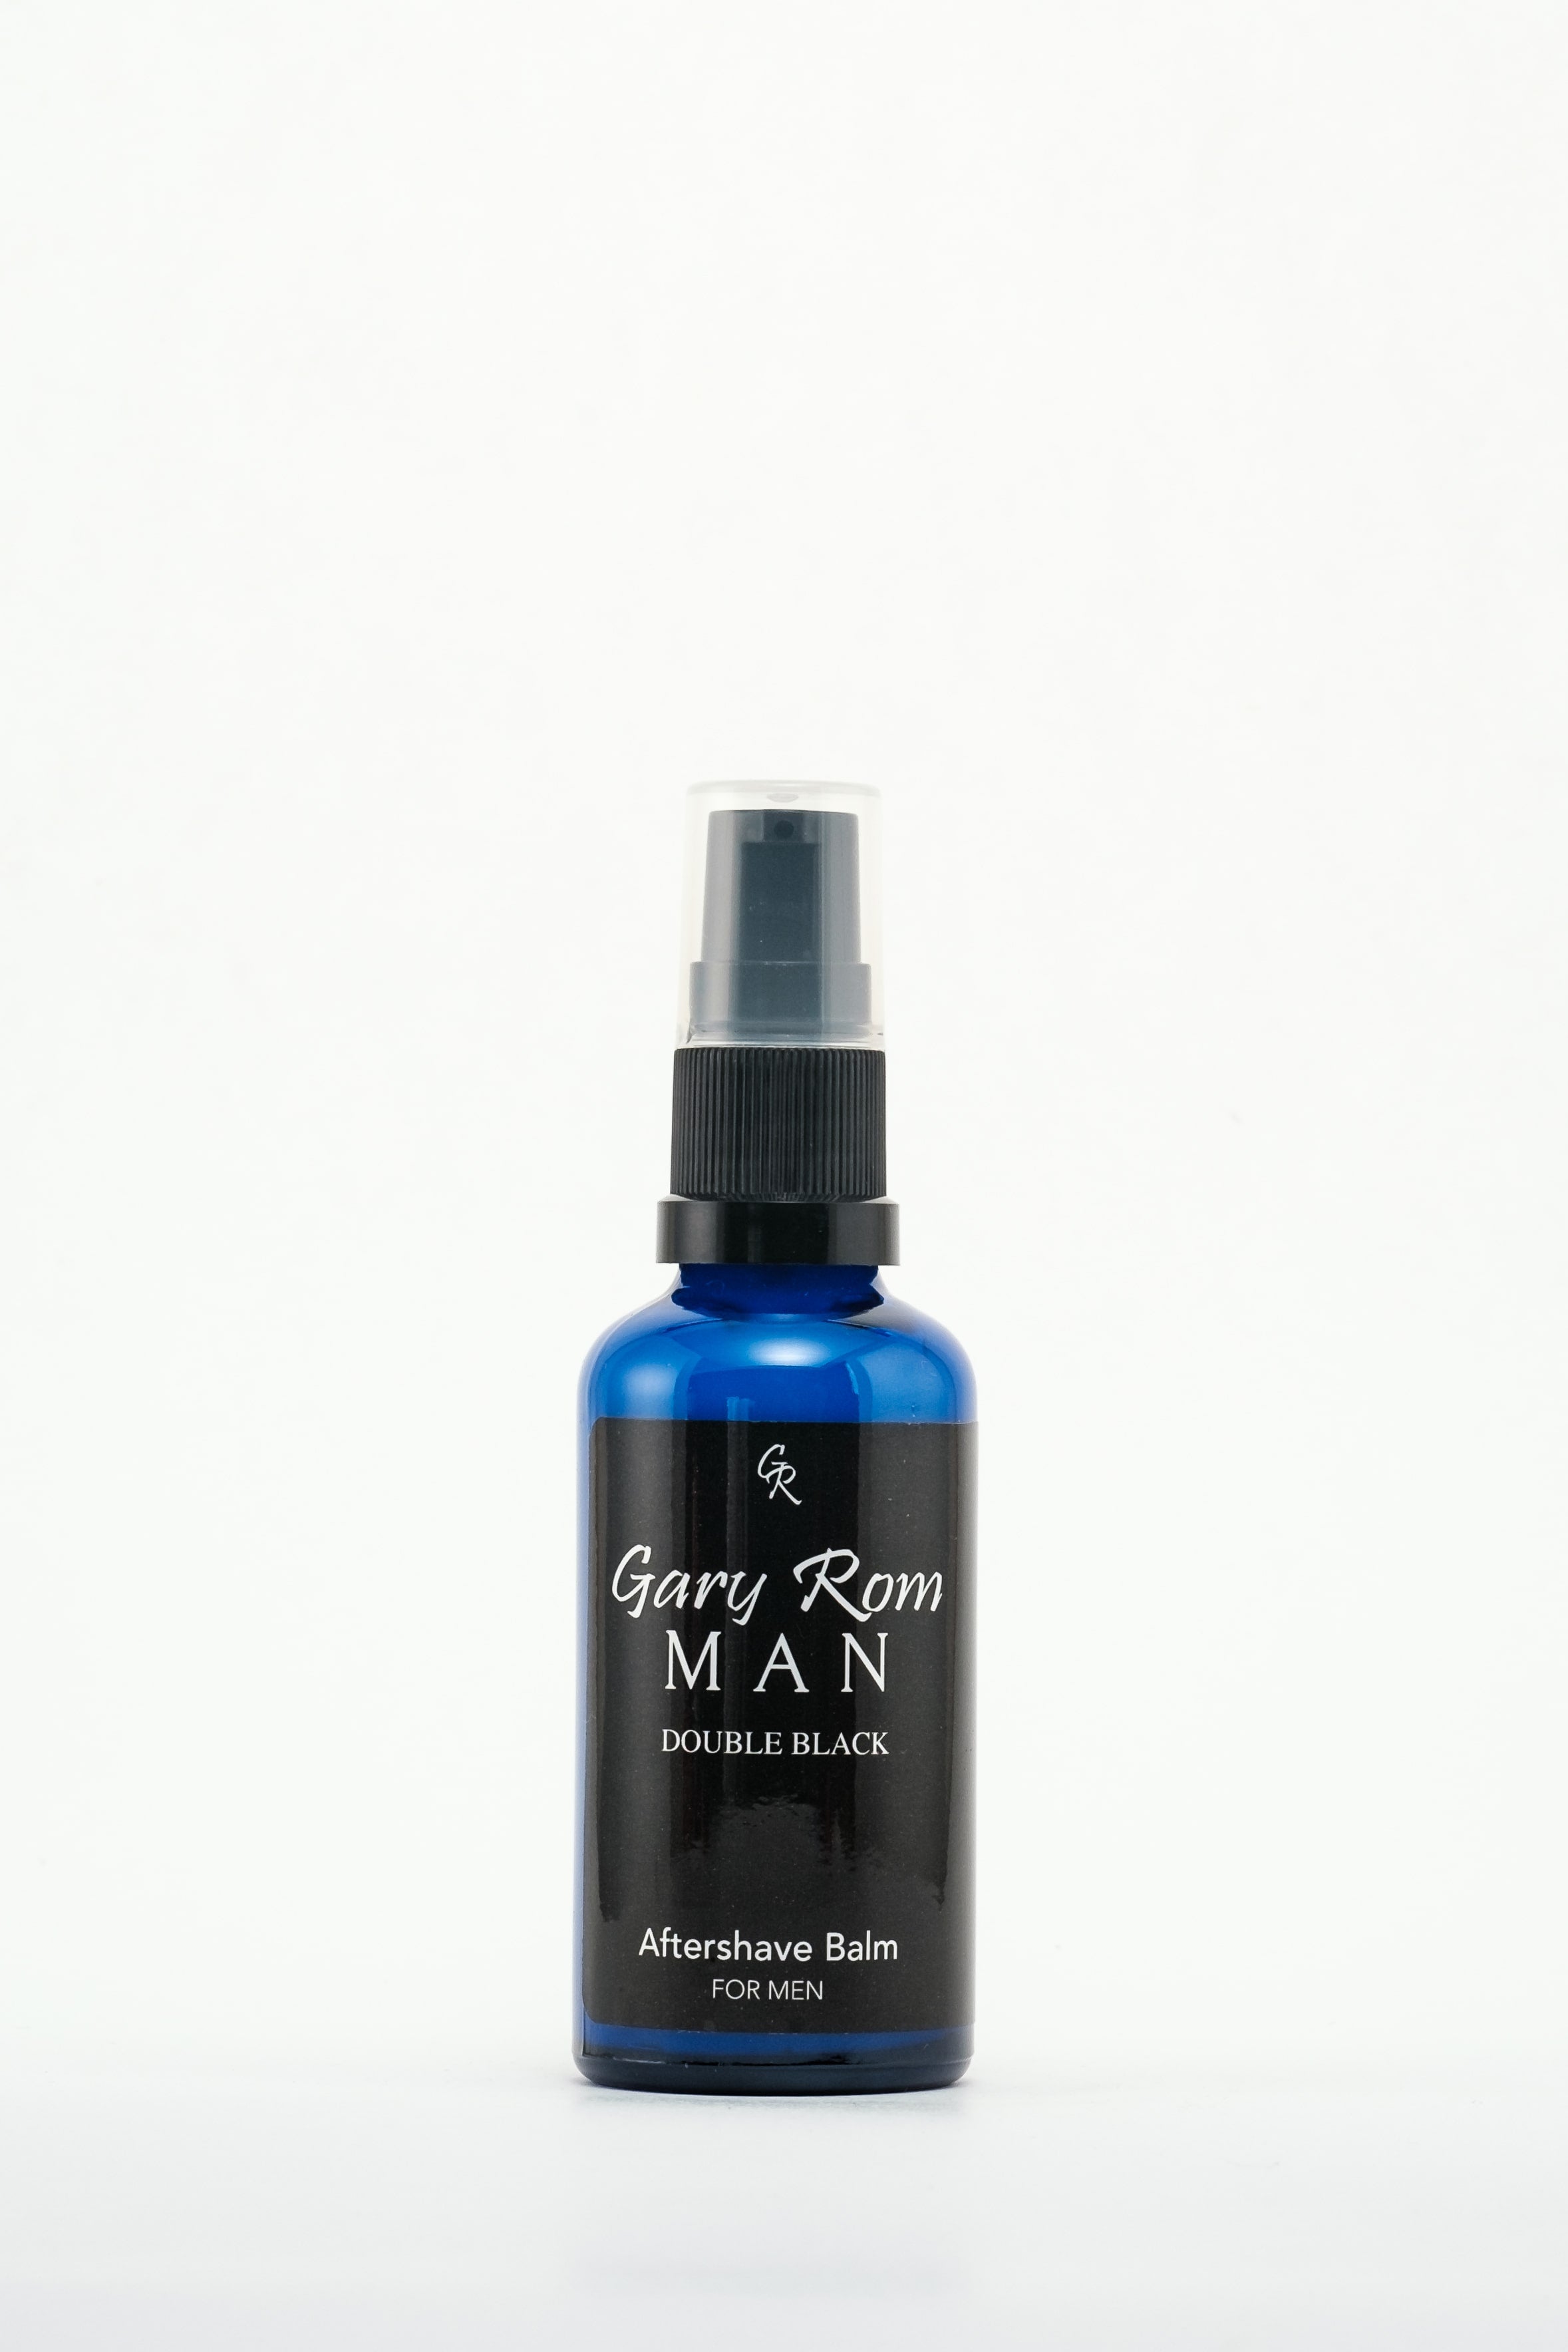 Gary Rom Man Double Black Aftershave Balm